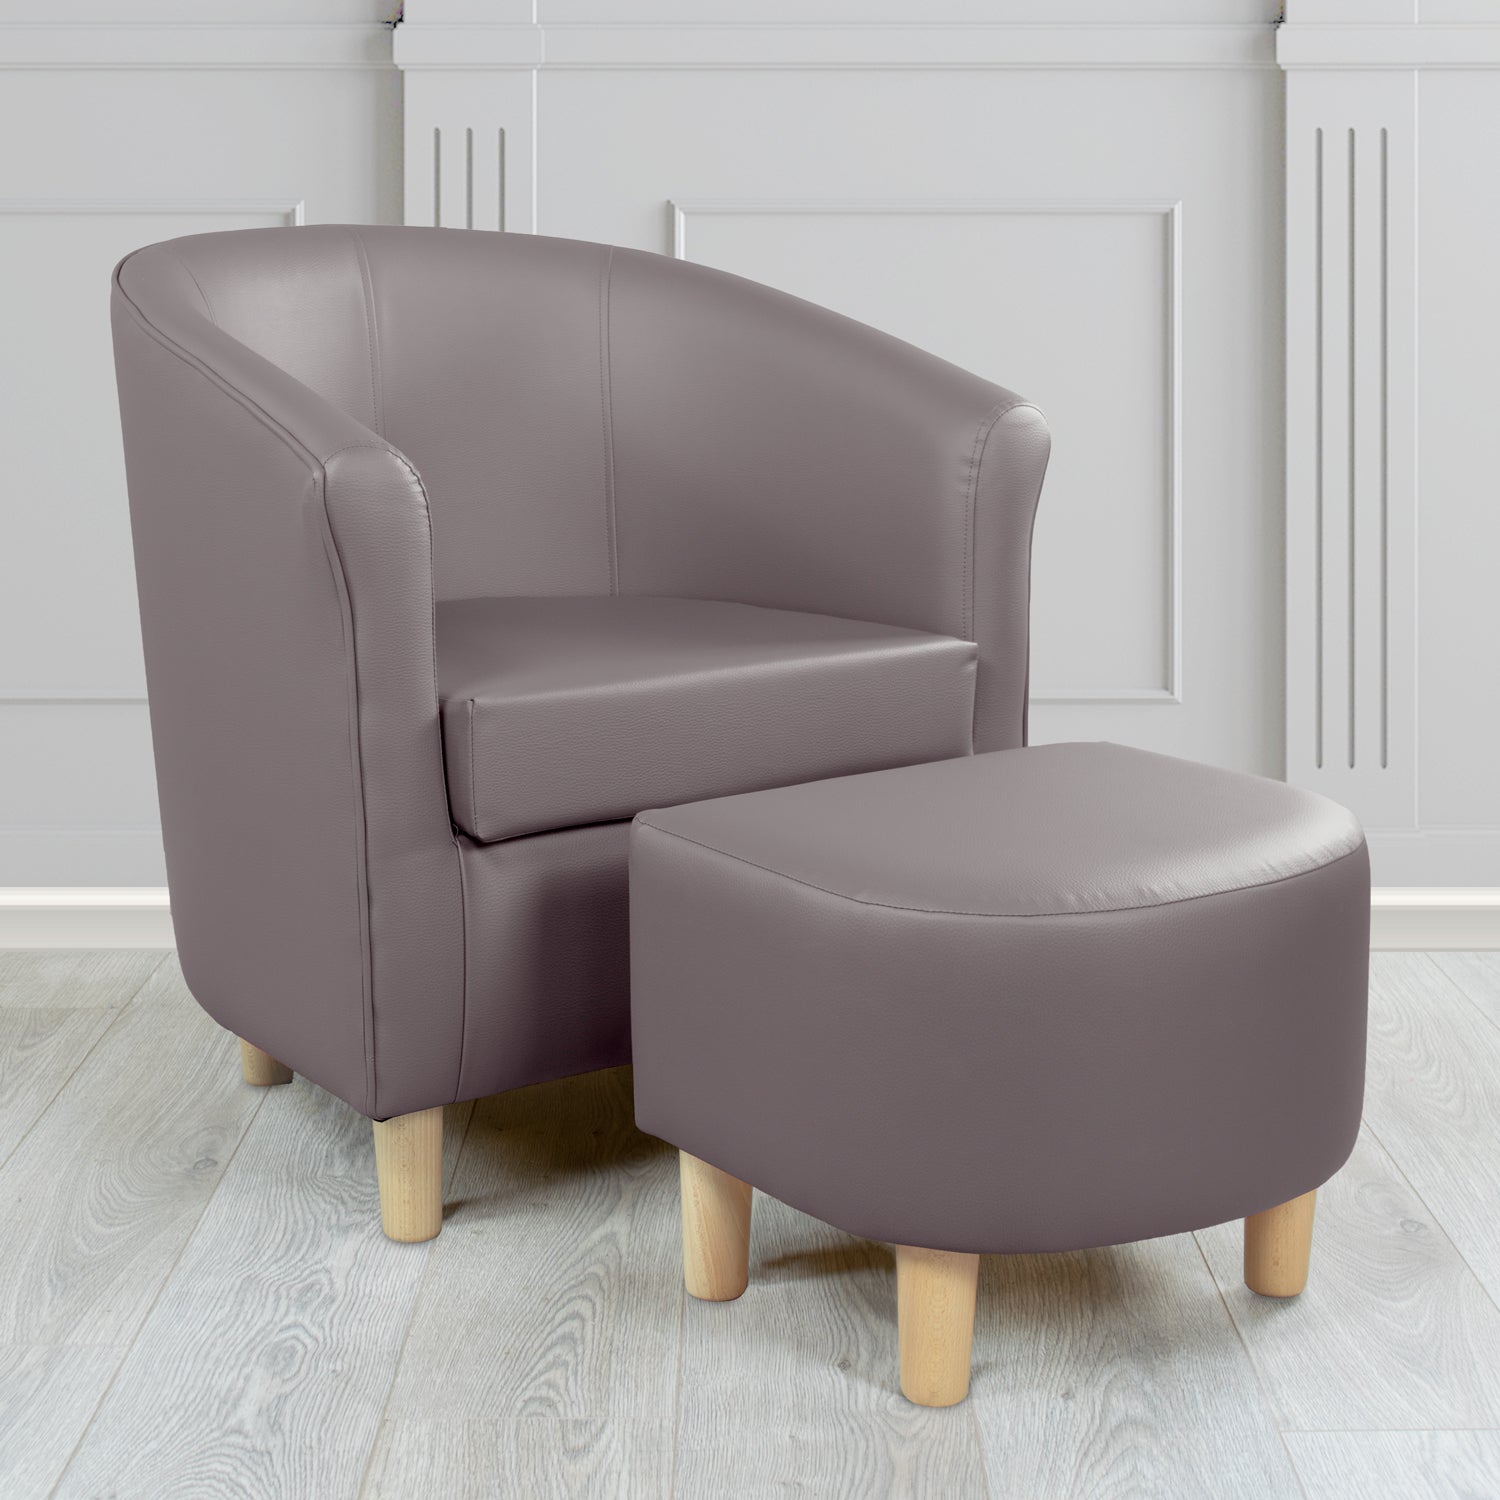 Tuscany Just Colour Elephant Faux Leather Tub Chair with Dee Footstool Set - The Tub Chair Shop